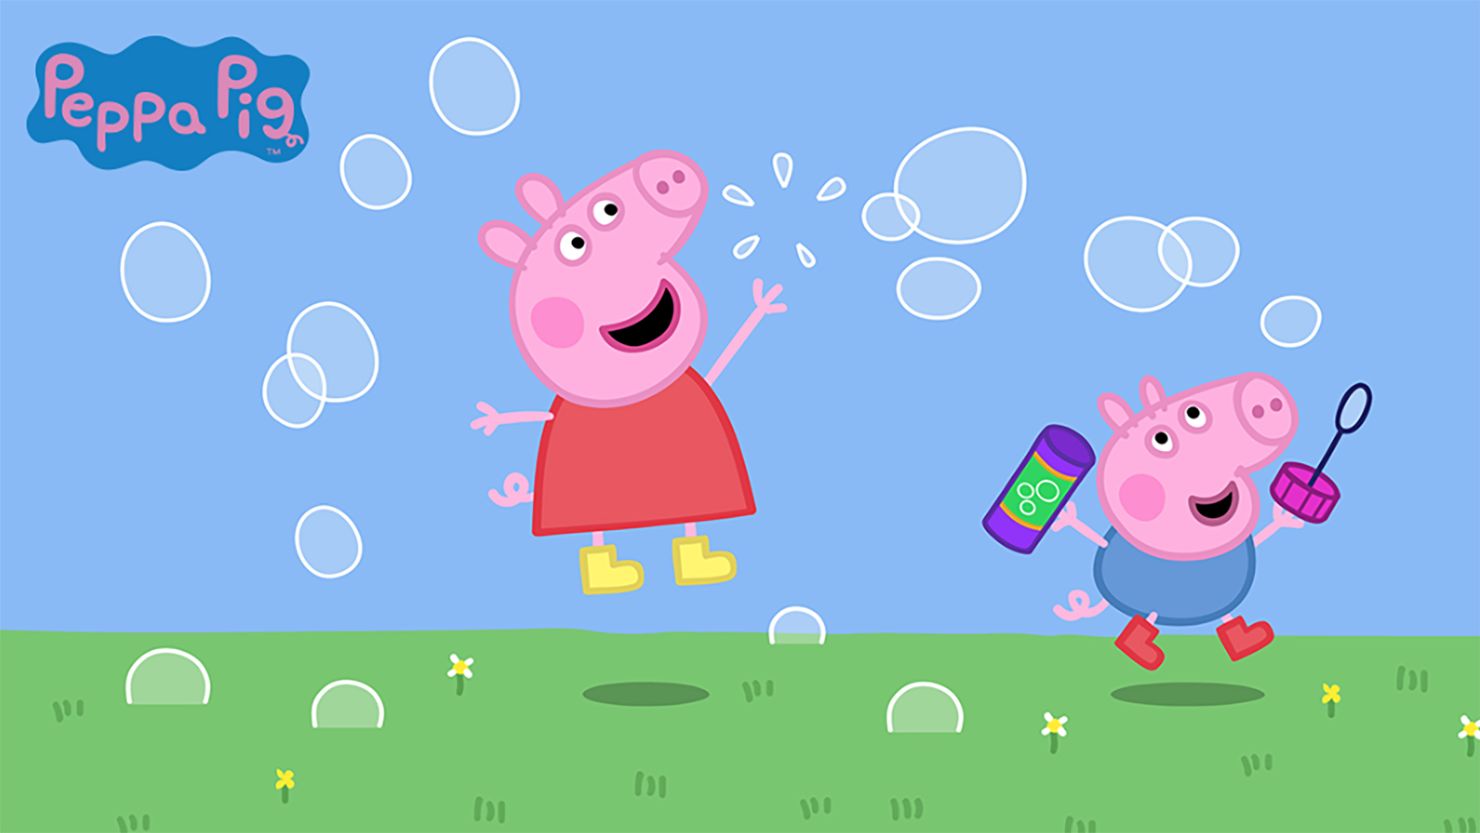 The internet is going hog wild over Peppa Pig. Here's a brief history of  the cartoon pig's life as a meme